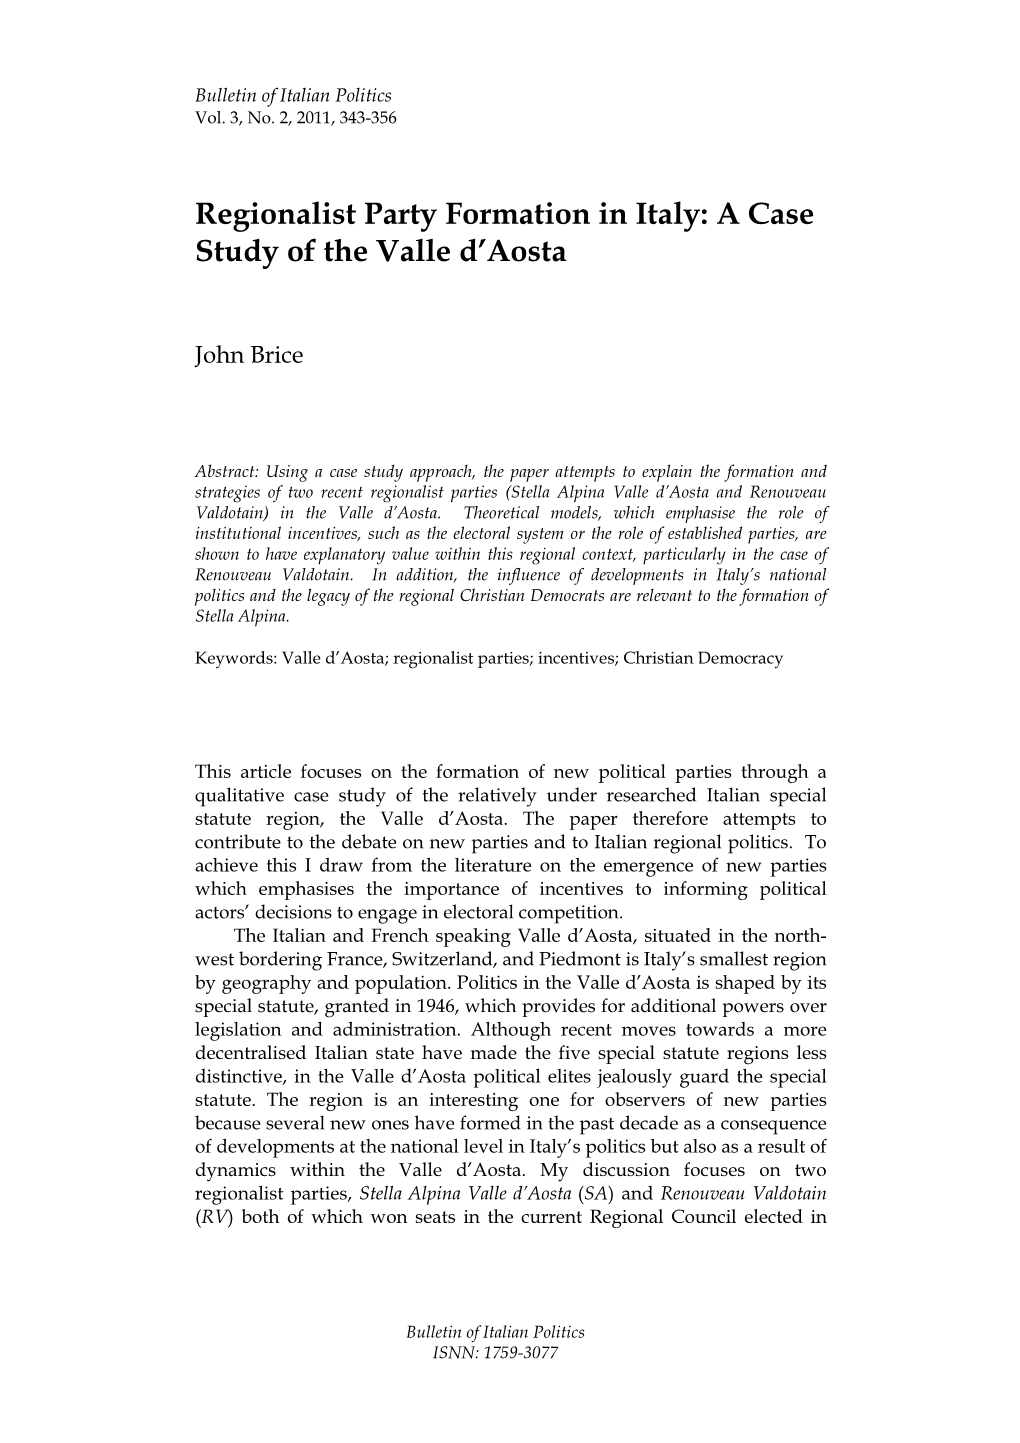 Regionalist Party Formation in Italy: a Case Study of the Valle D'aosta